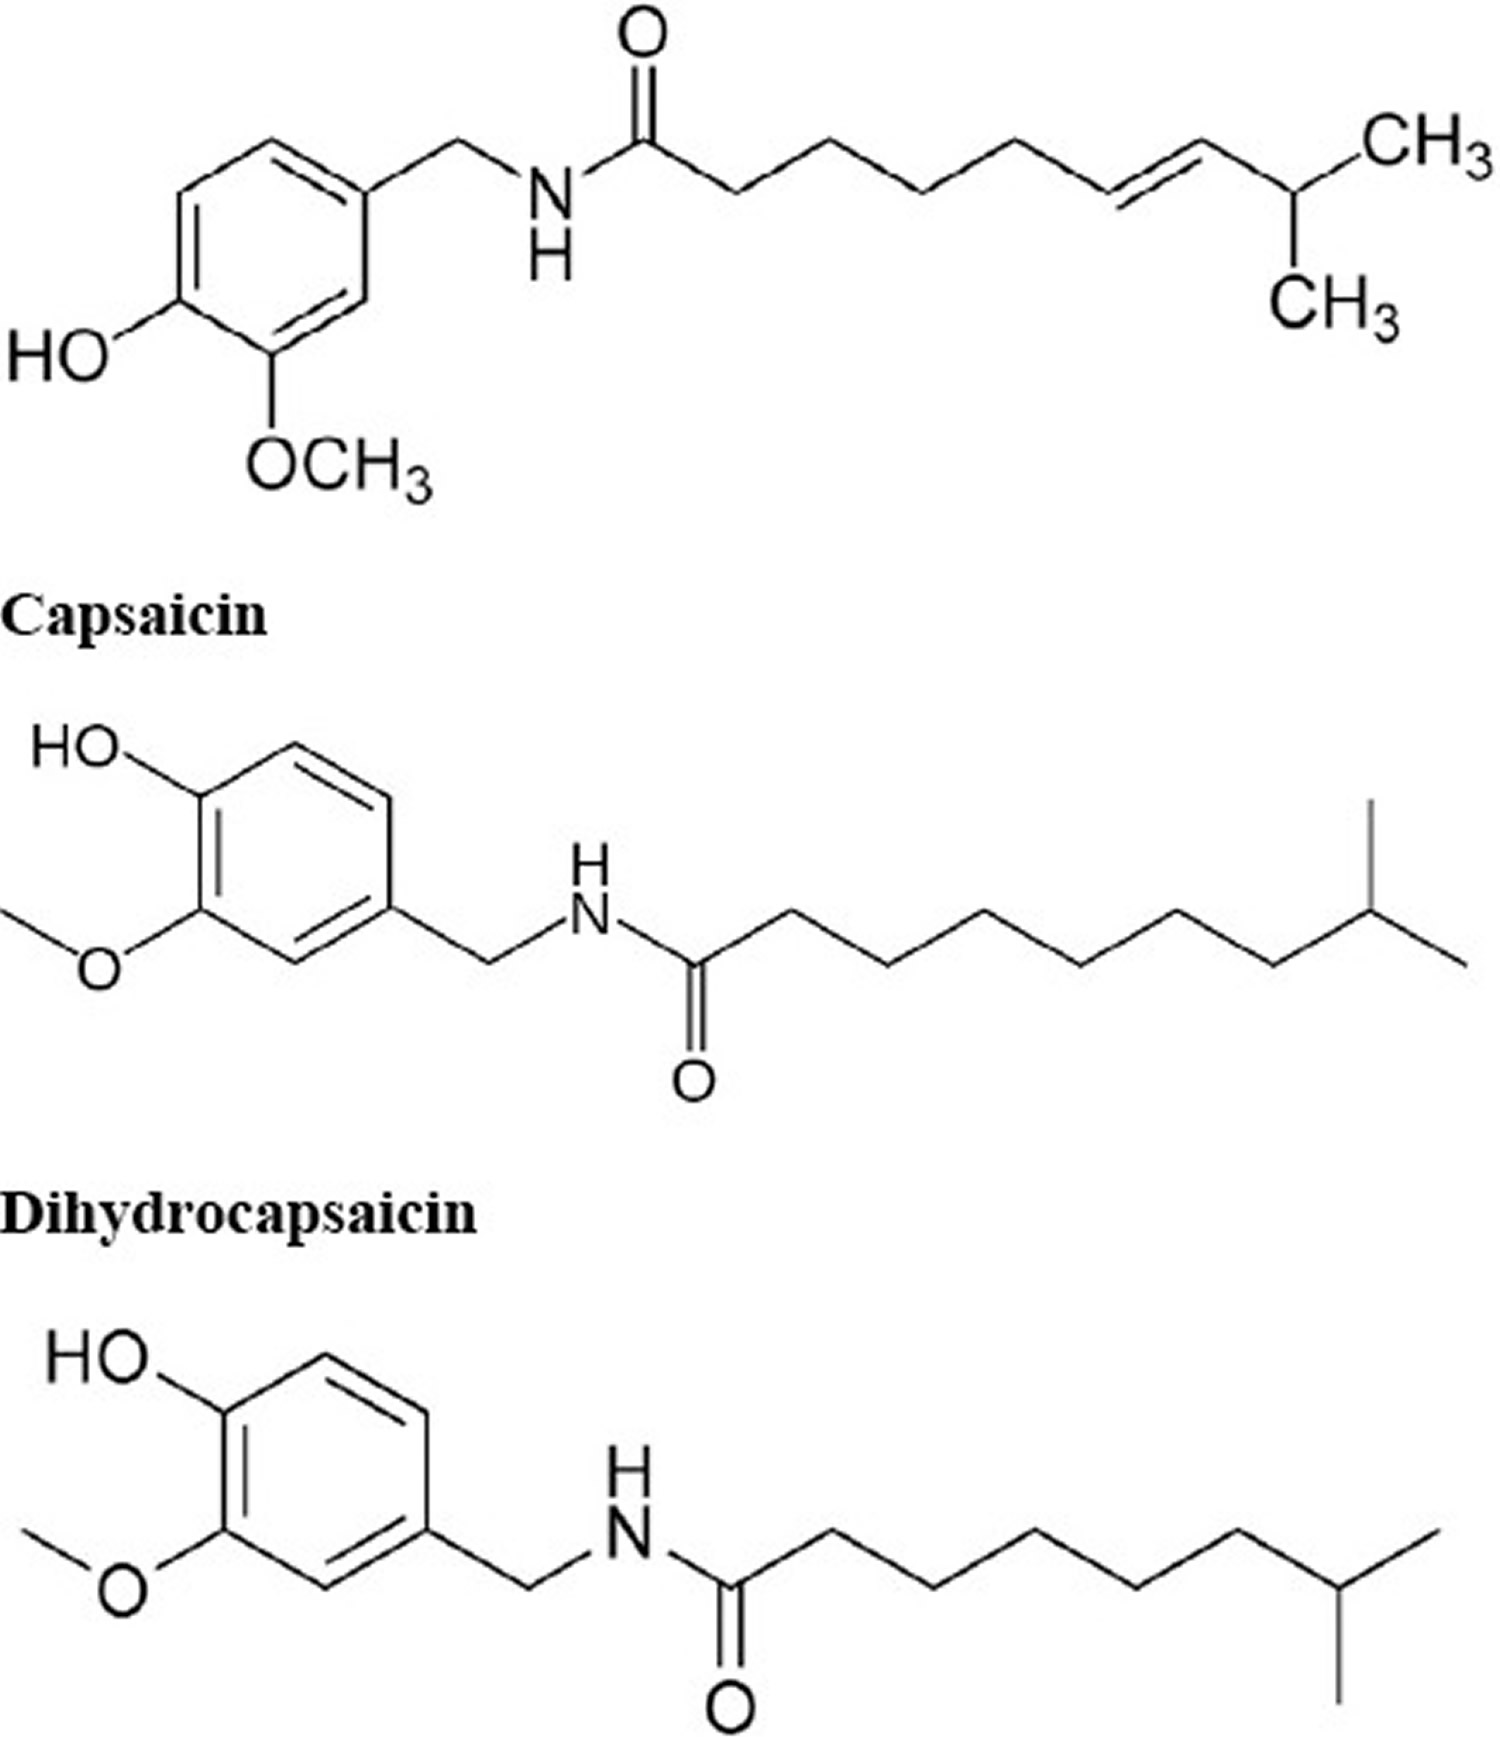 Chemical structures of capsaicinoids